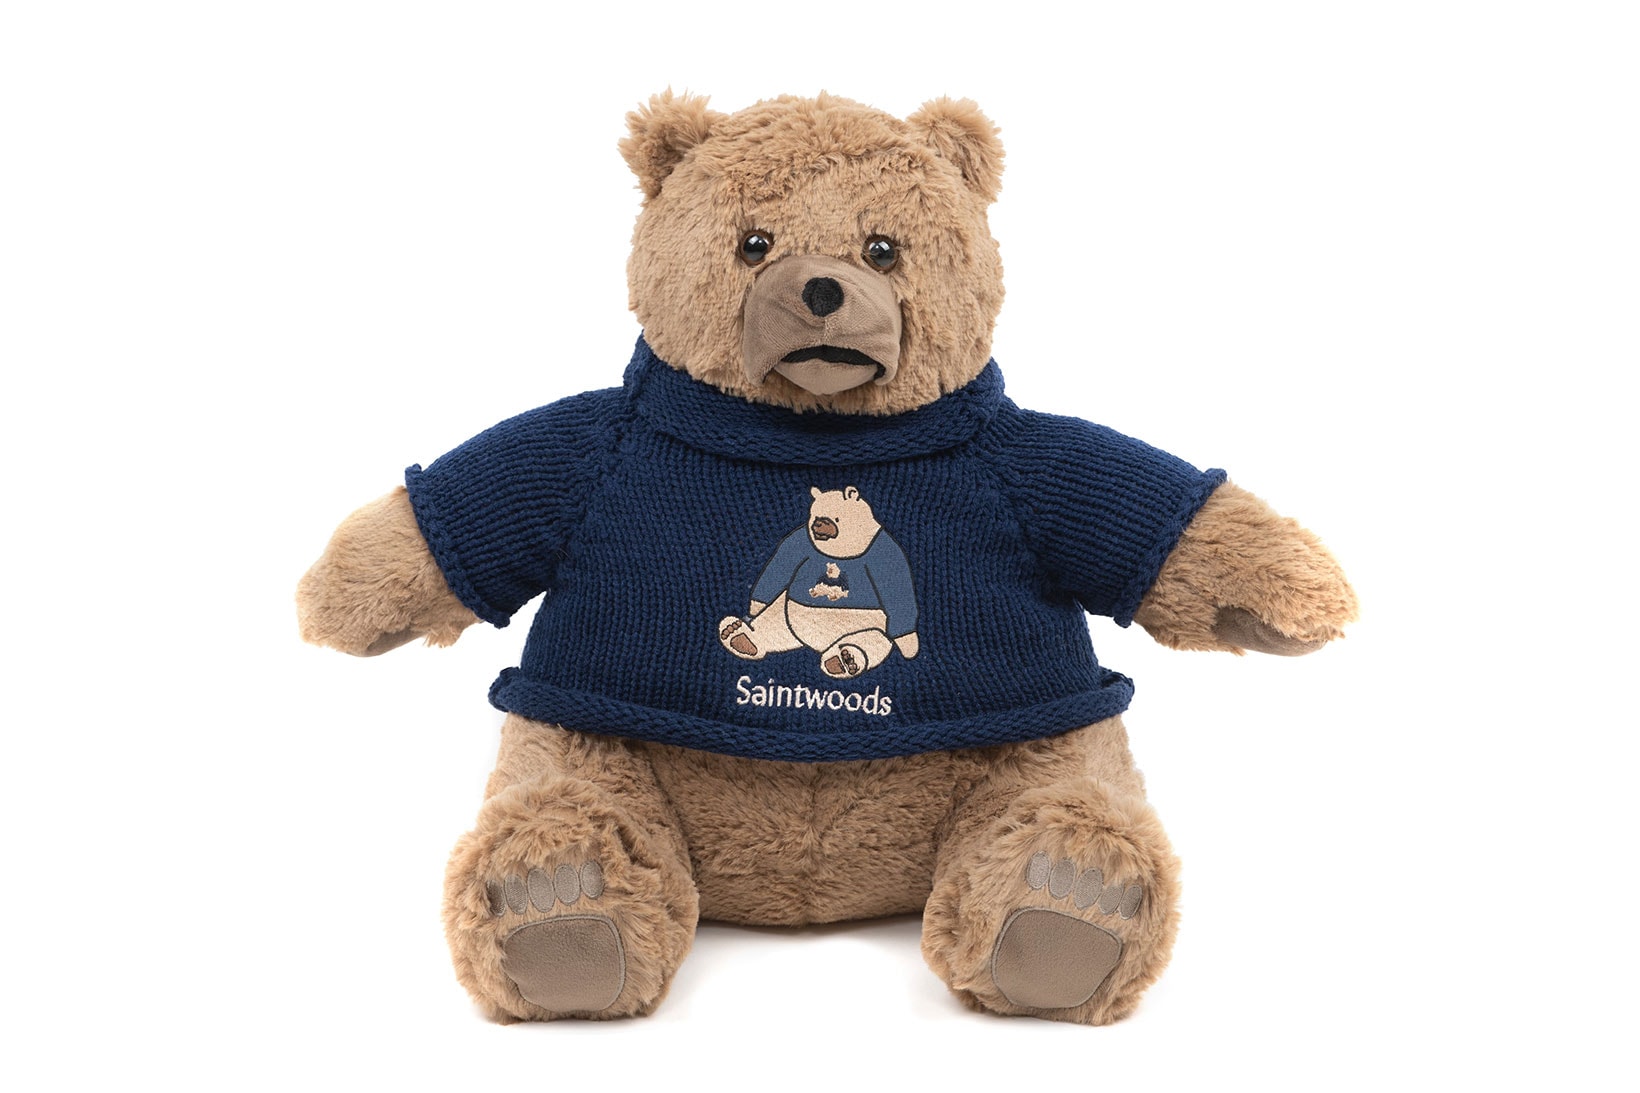 Saintwoods Paris Exclusives Collection SW Stuffed Bear